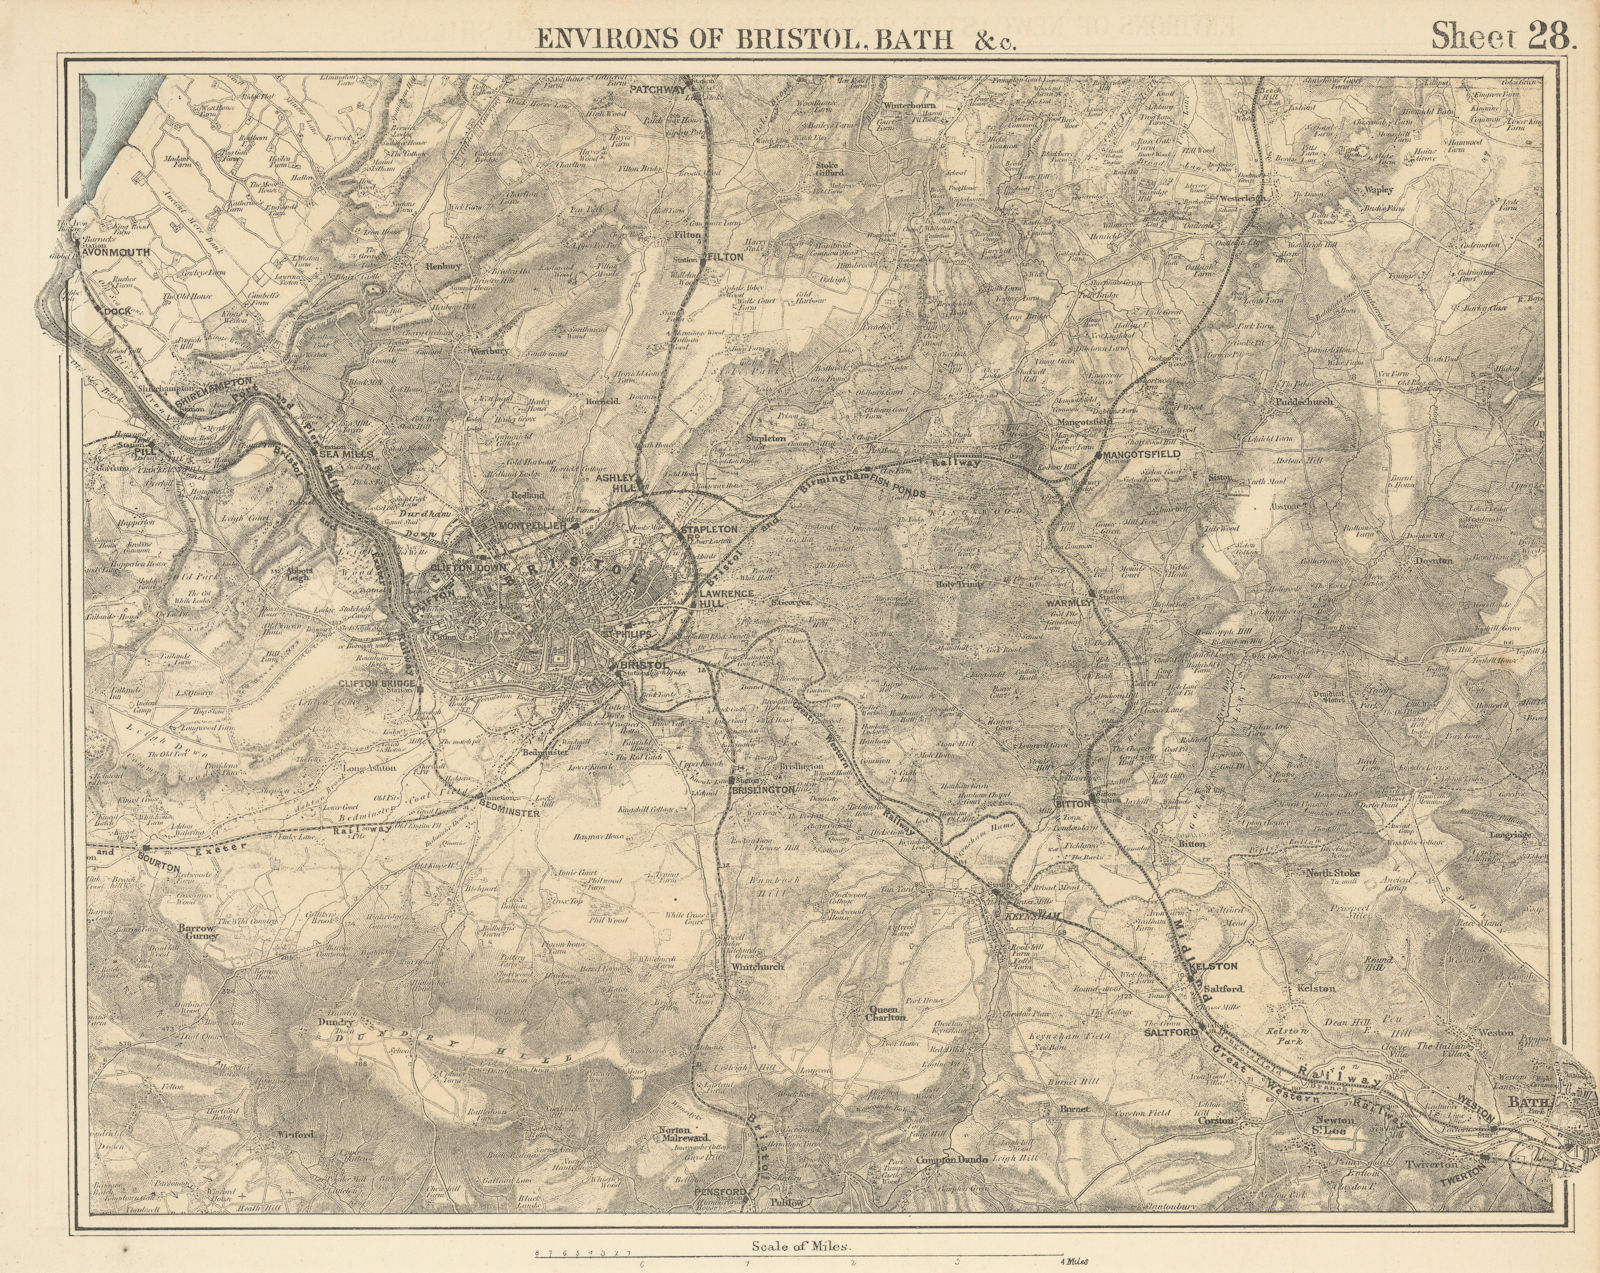 BRISTOL, BATH & environs. South Cotswolds. North Mendips by GW BACON 1883 map